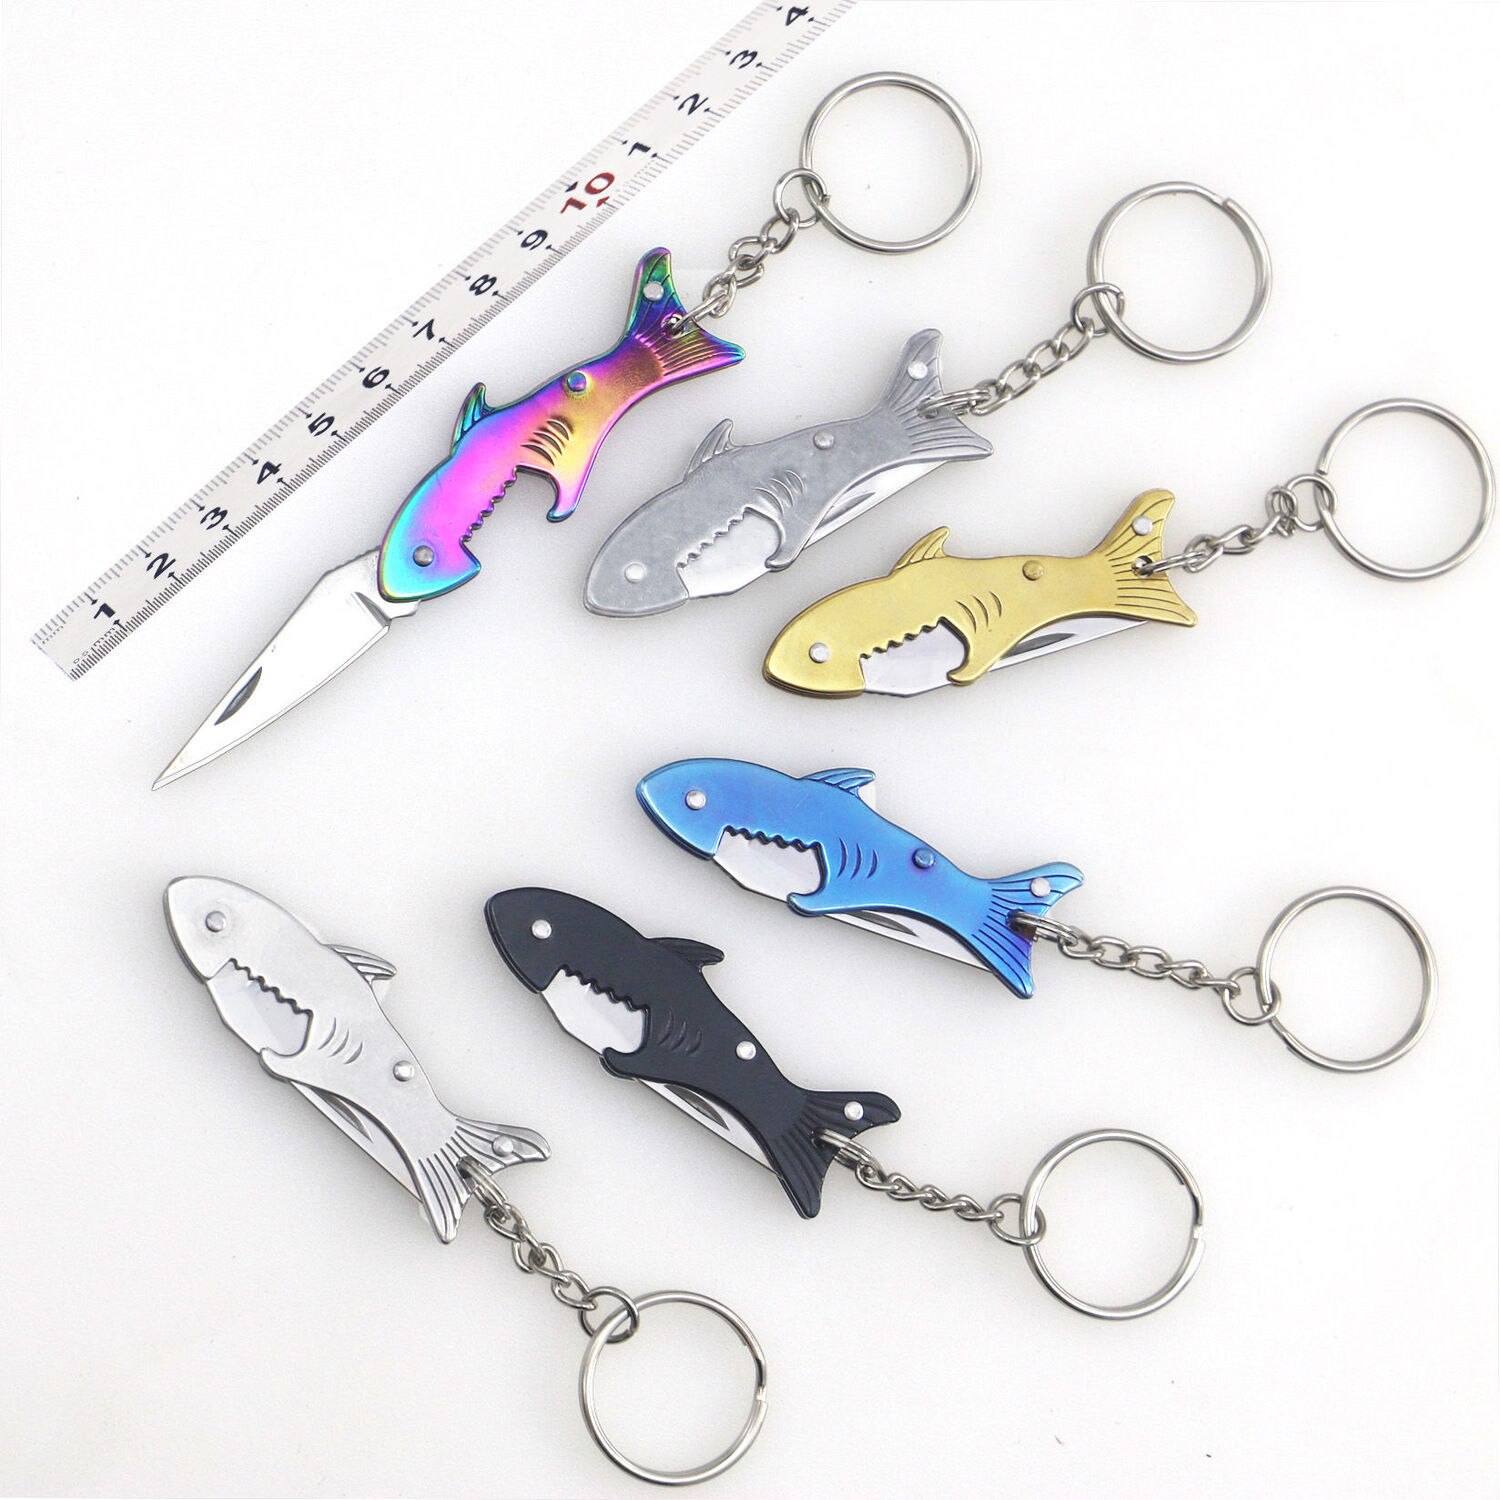 Mini Key Knife Outdoor Camping Self Defense Emergency Survival Knife Tool Portable Size Keyring Ring Keychain 1 3 - Self Defence Weapon